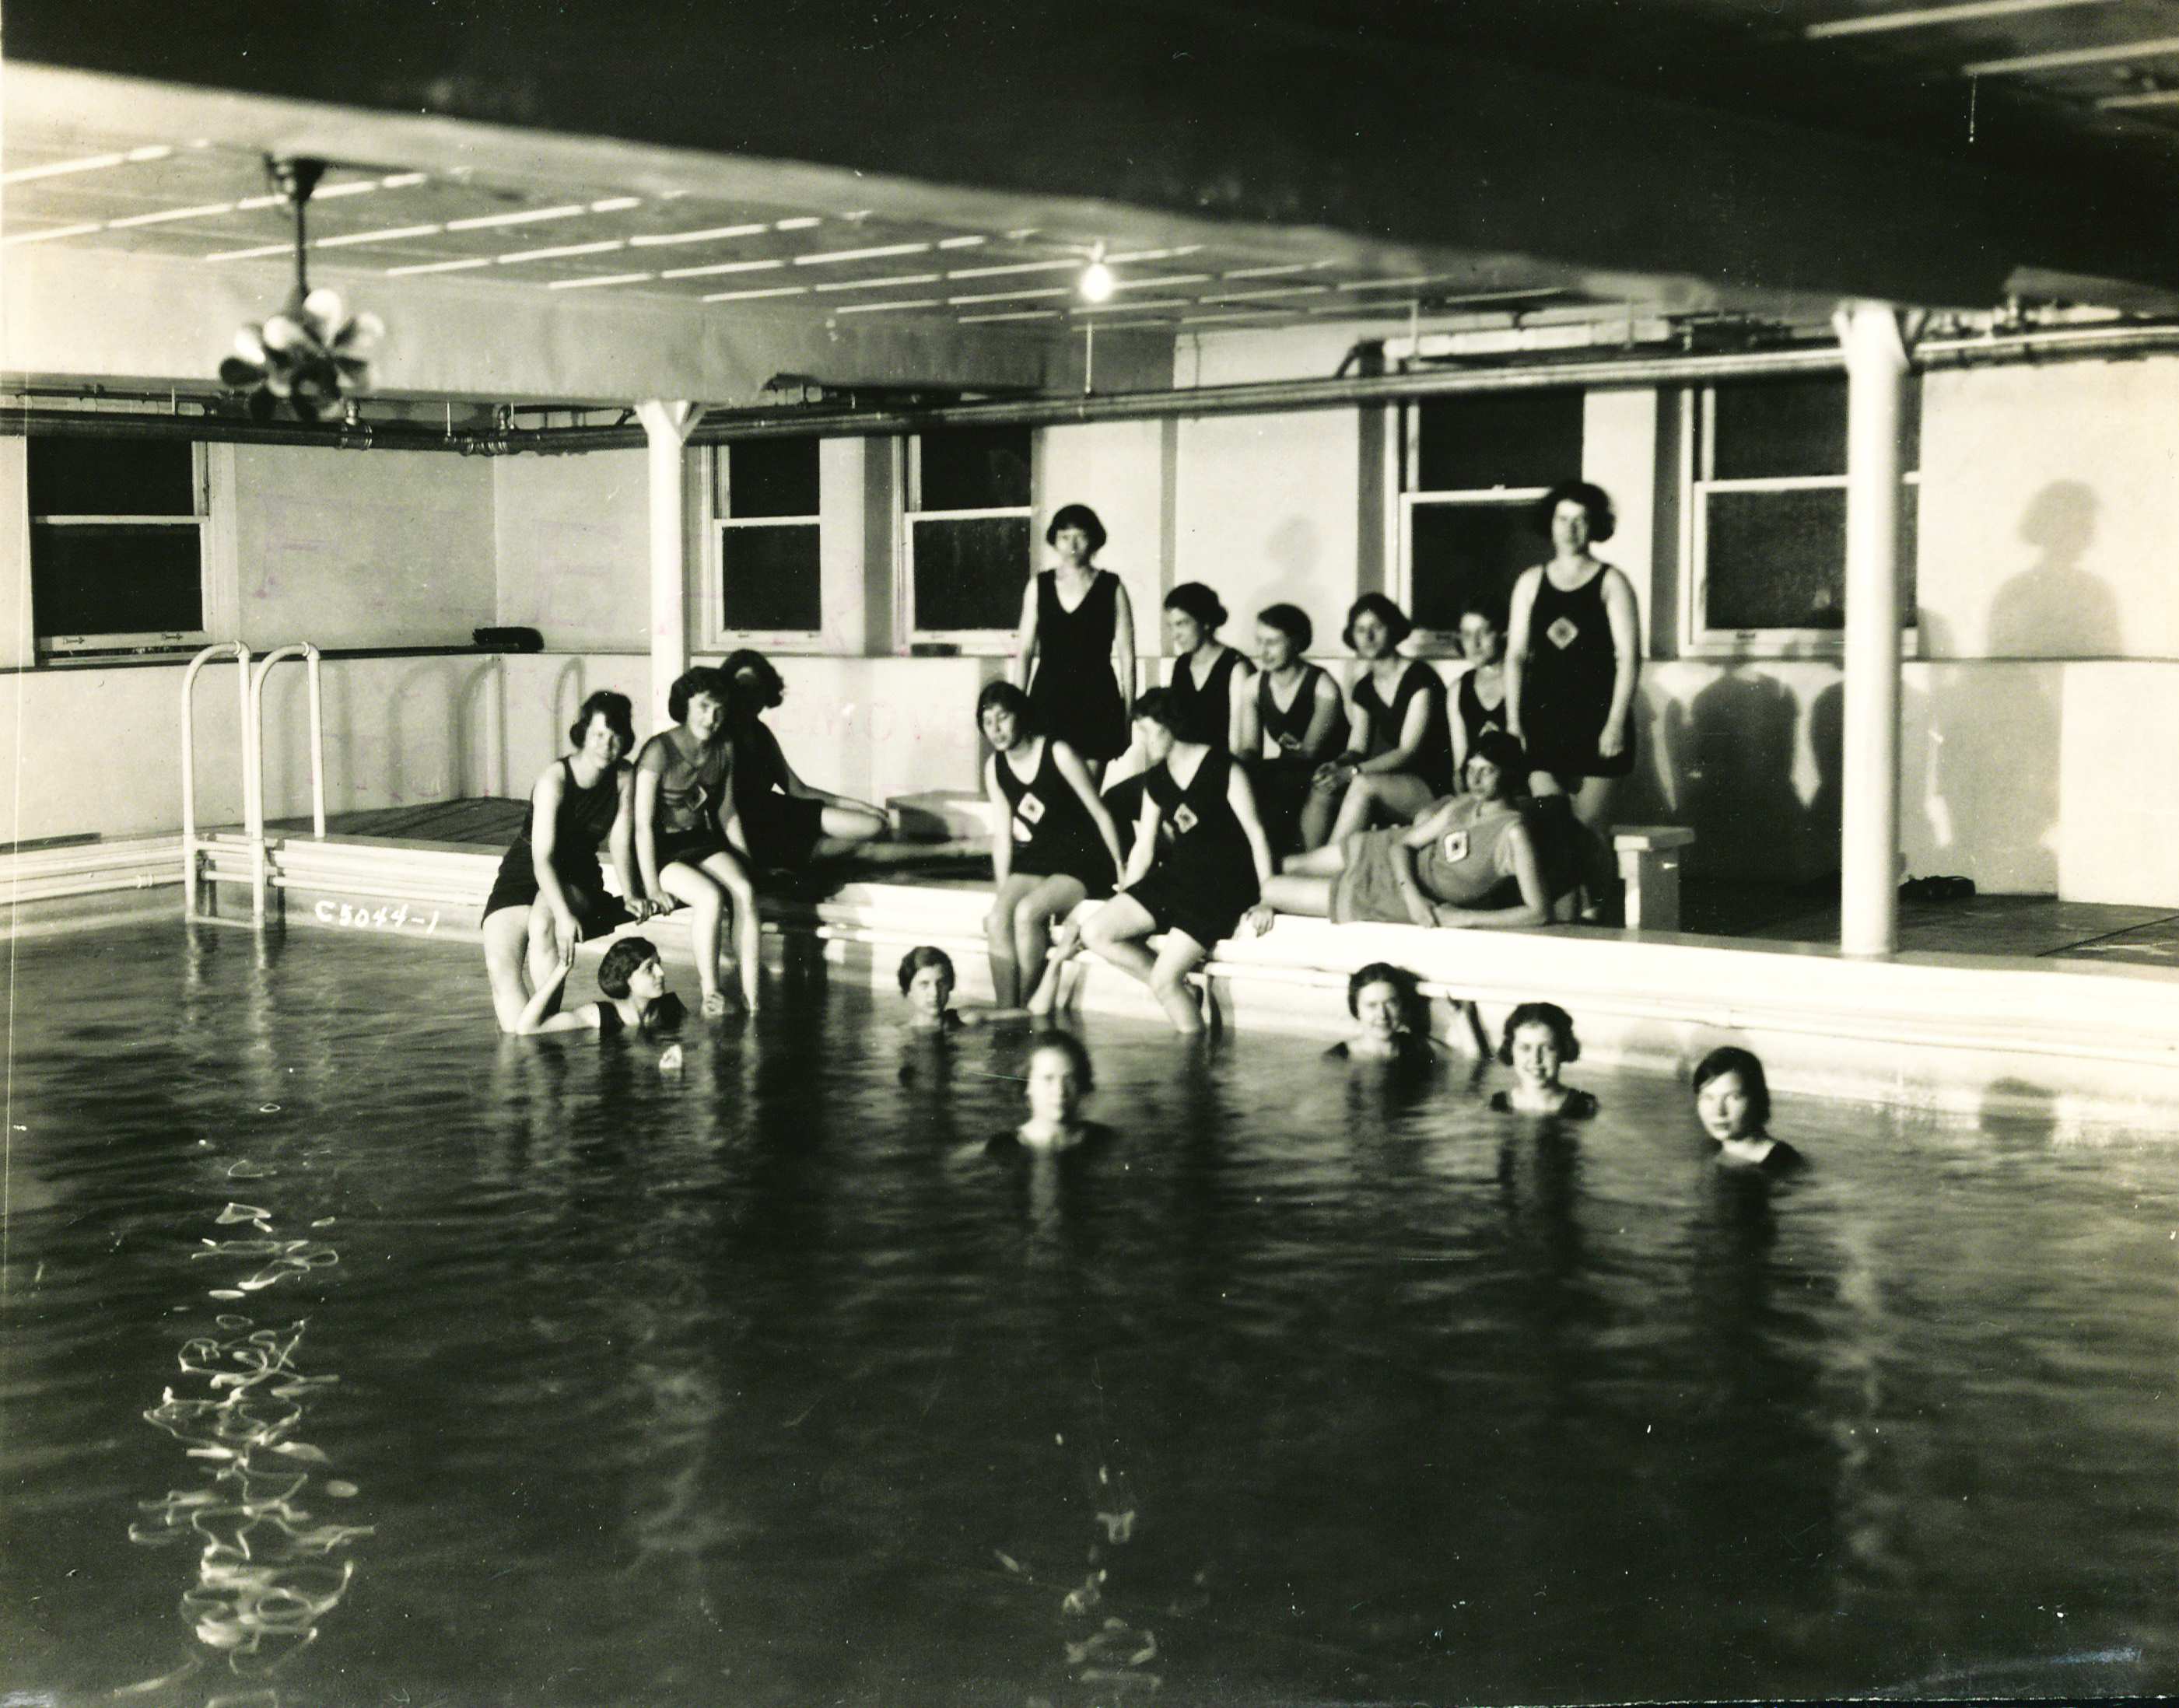 about a dozen young women in 1920s bathing costumes in a pool